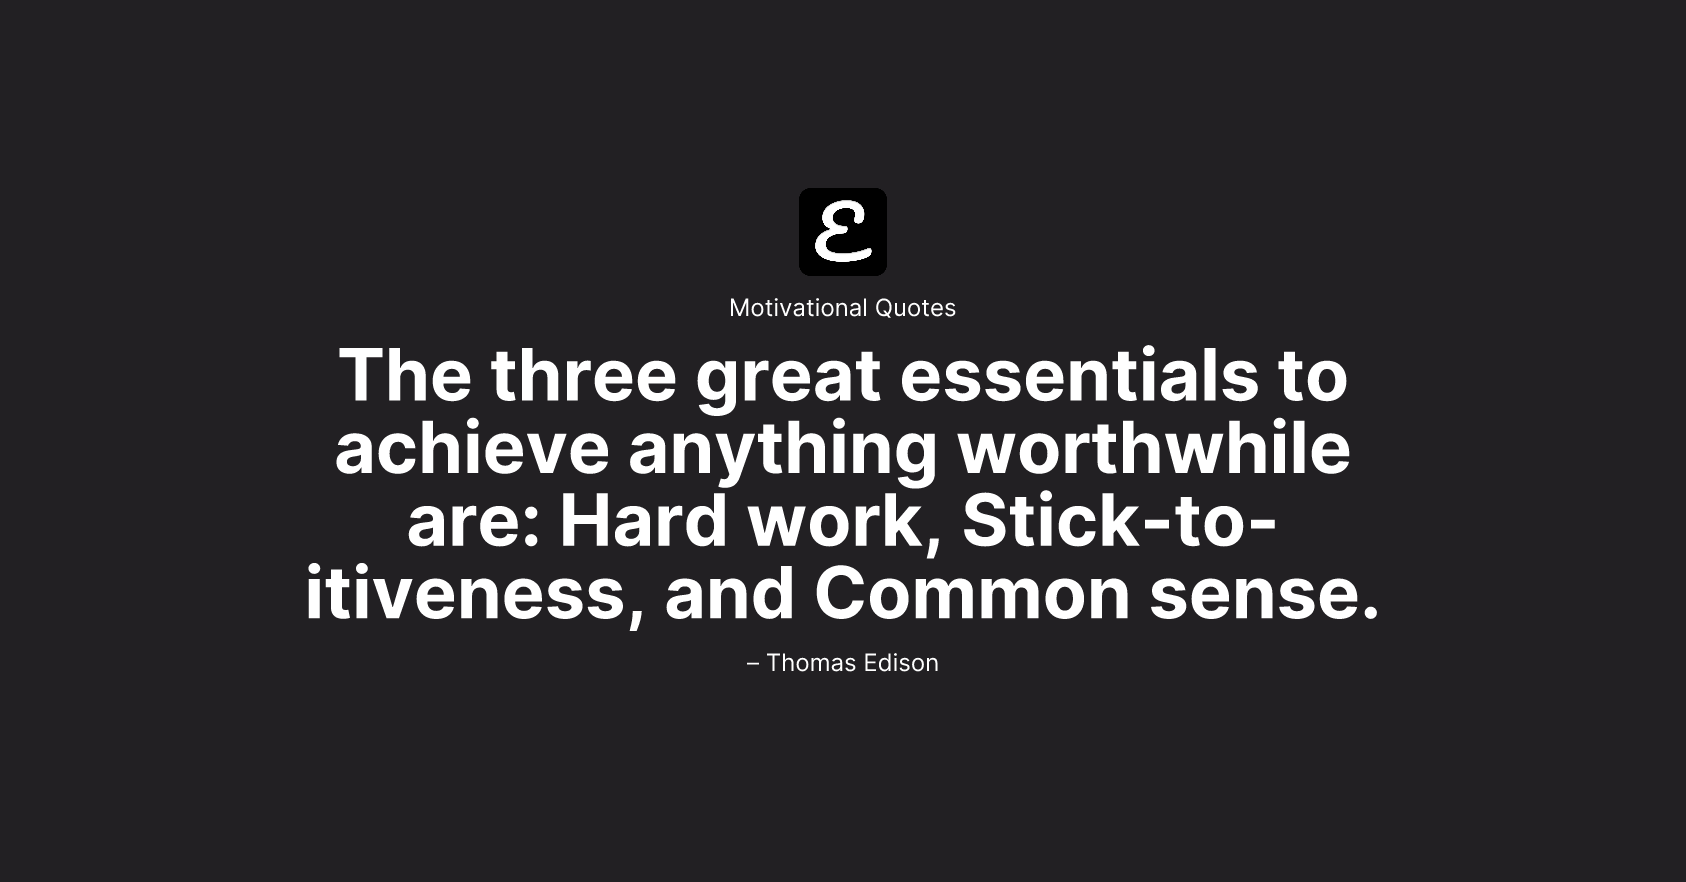 Thomas Edison - The three great essentials to achieve anything worthwhile are: Hard work, Stick-to-itiveness, and Common sense.